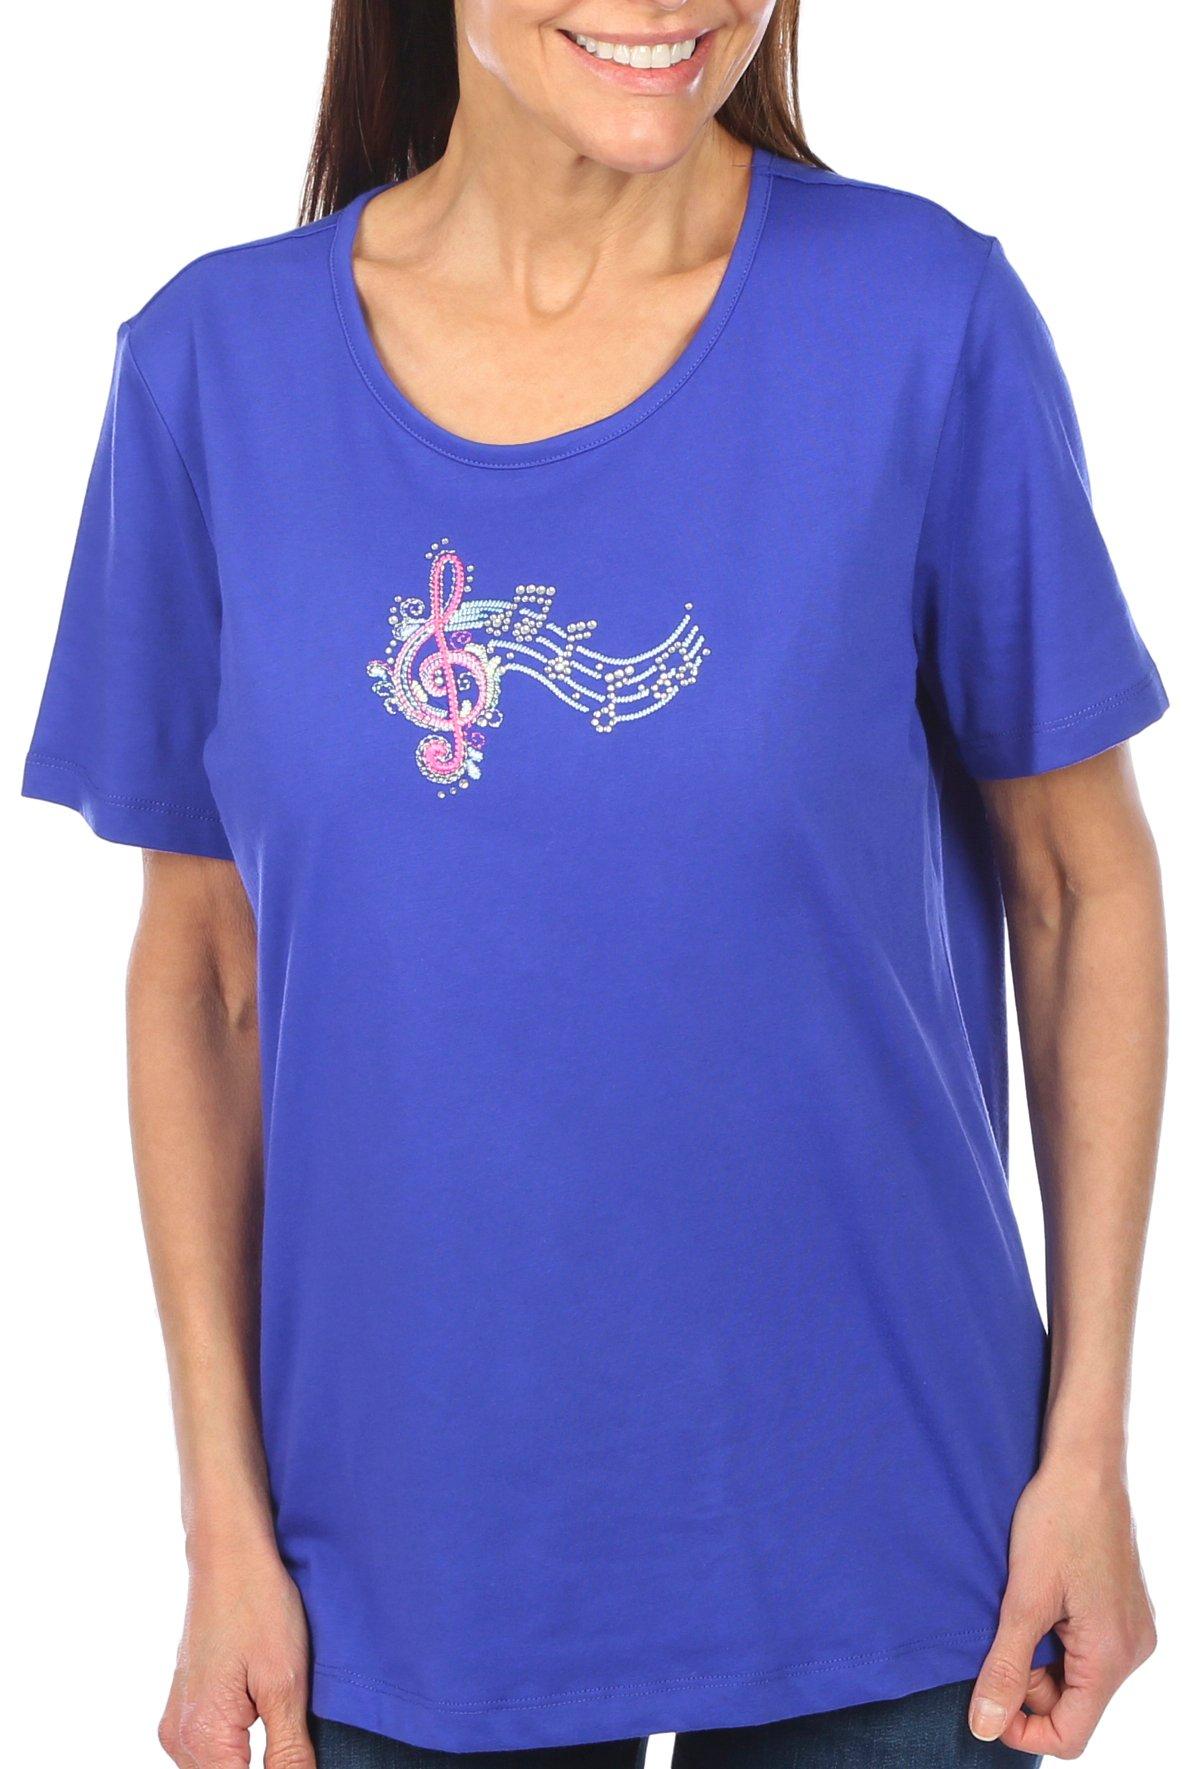 Womens Embellished Music Short Sleeve Top